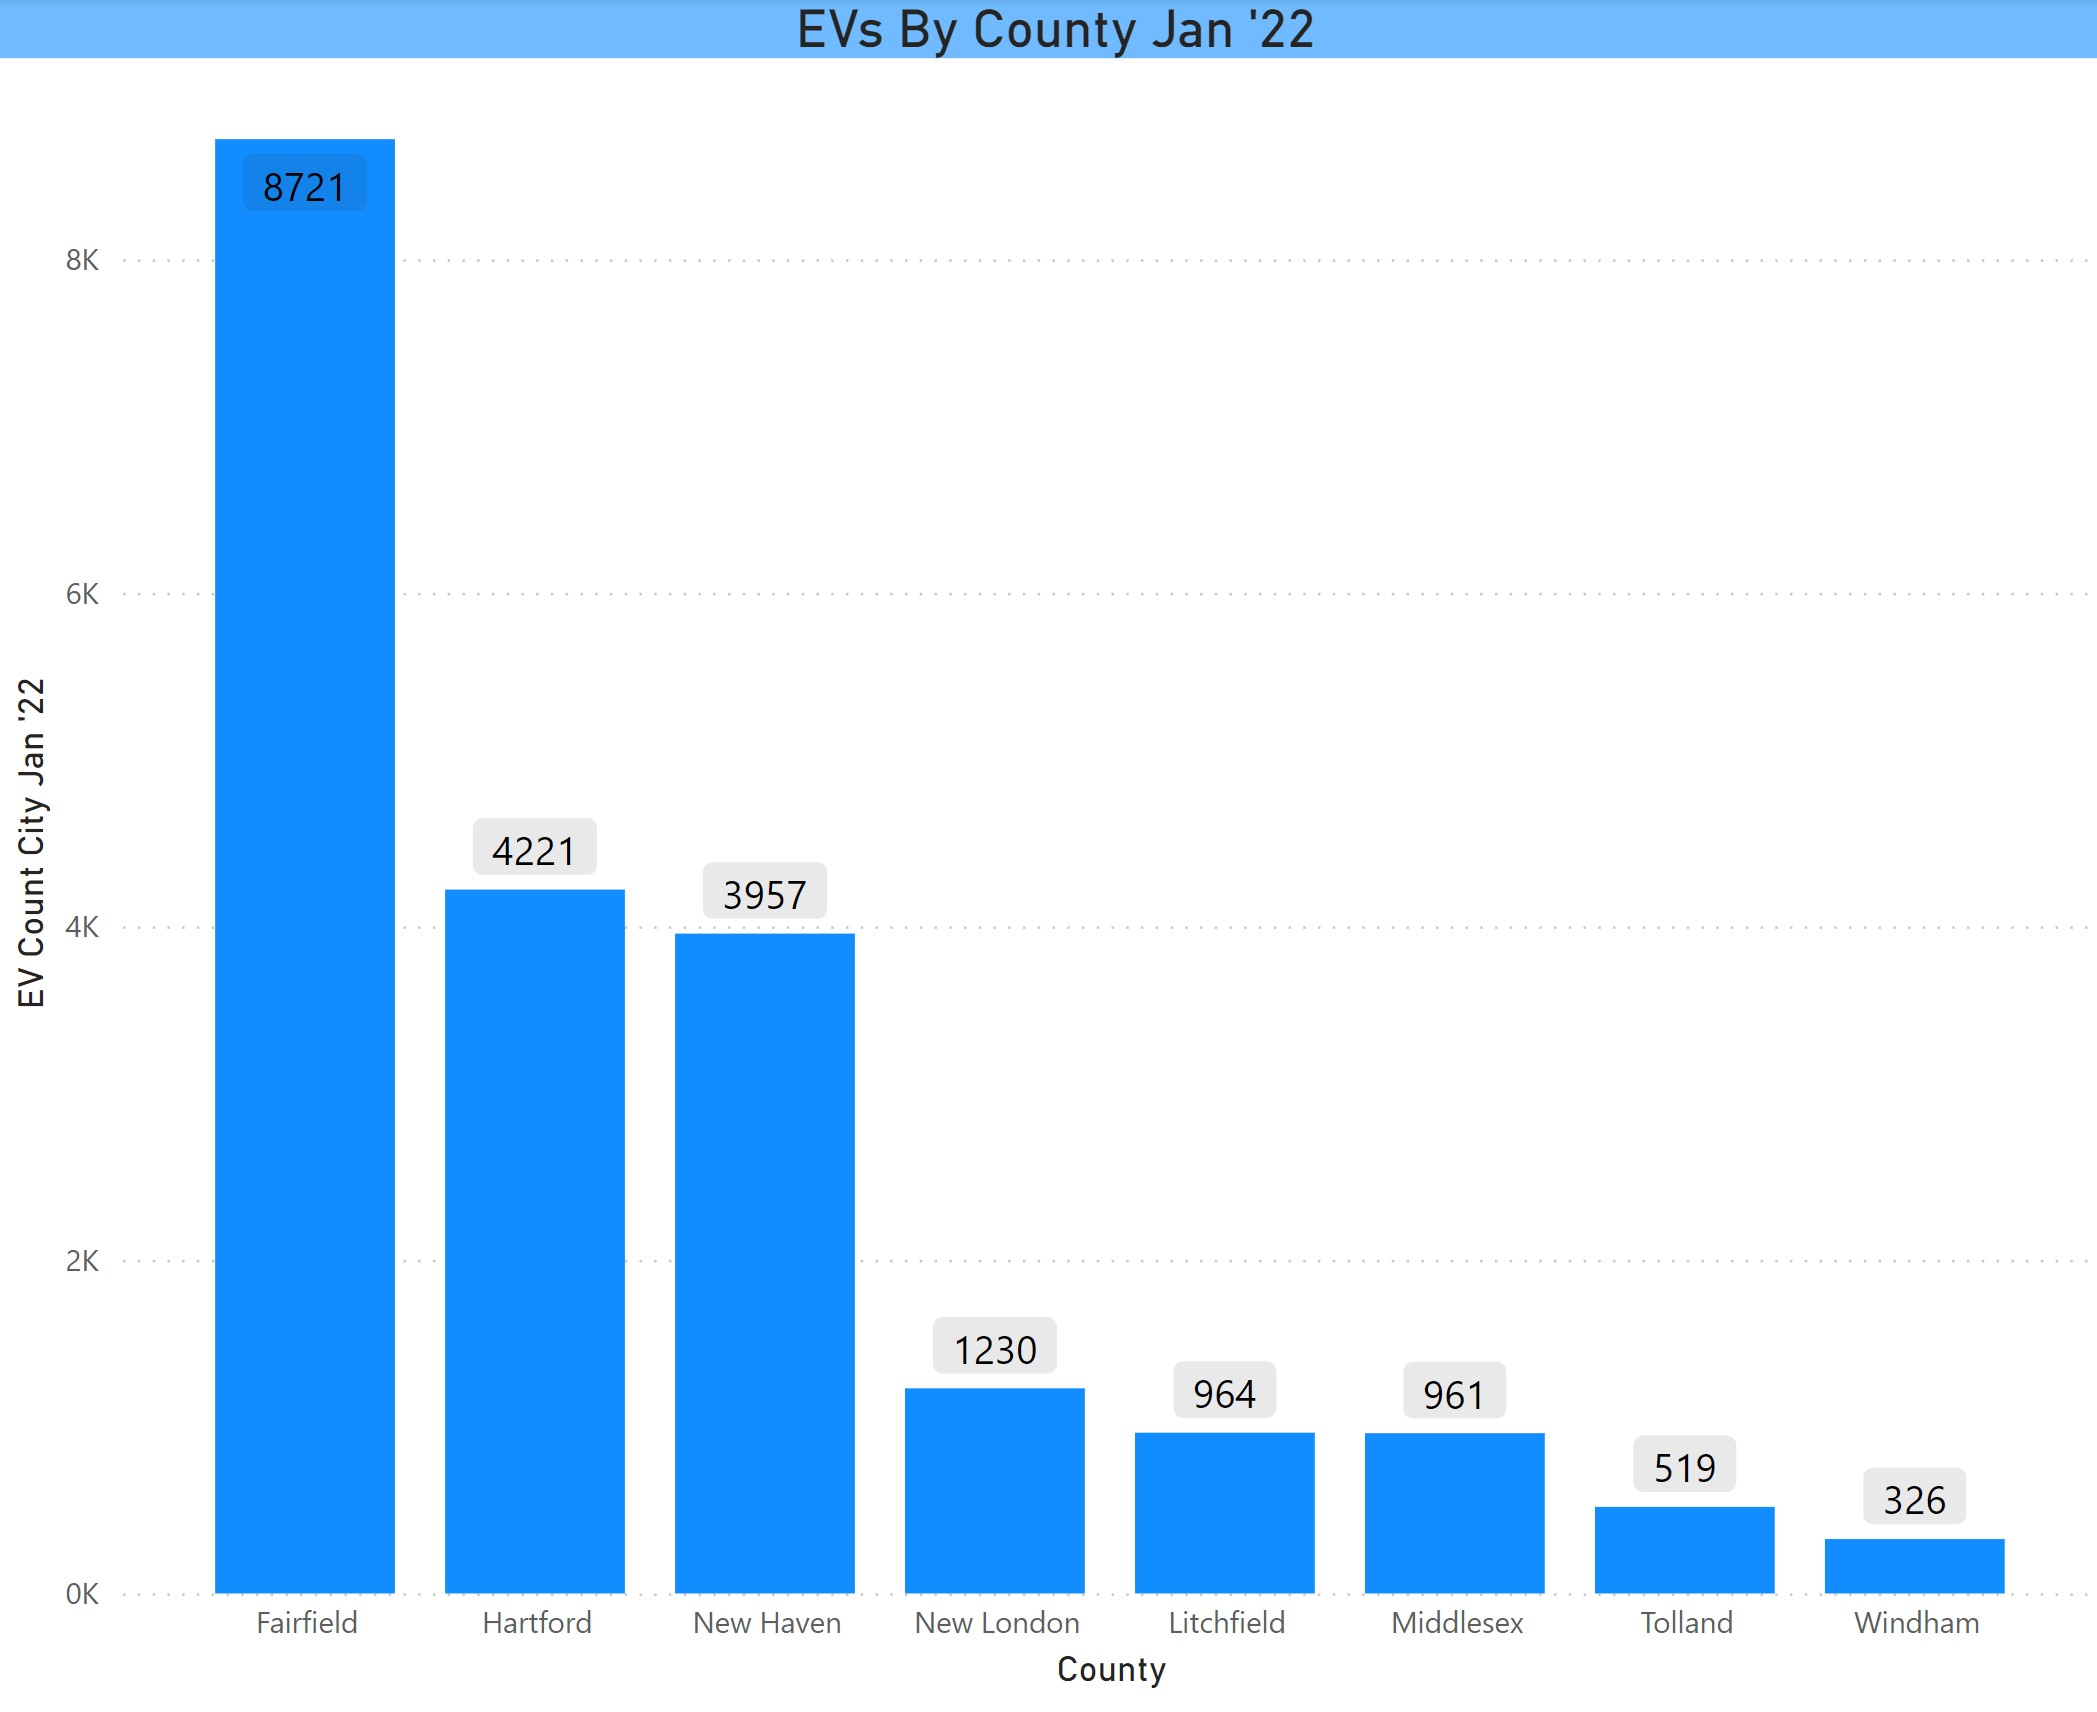 EVs by County in CT Jan 2022